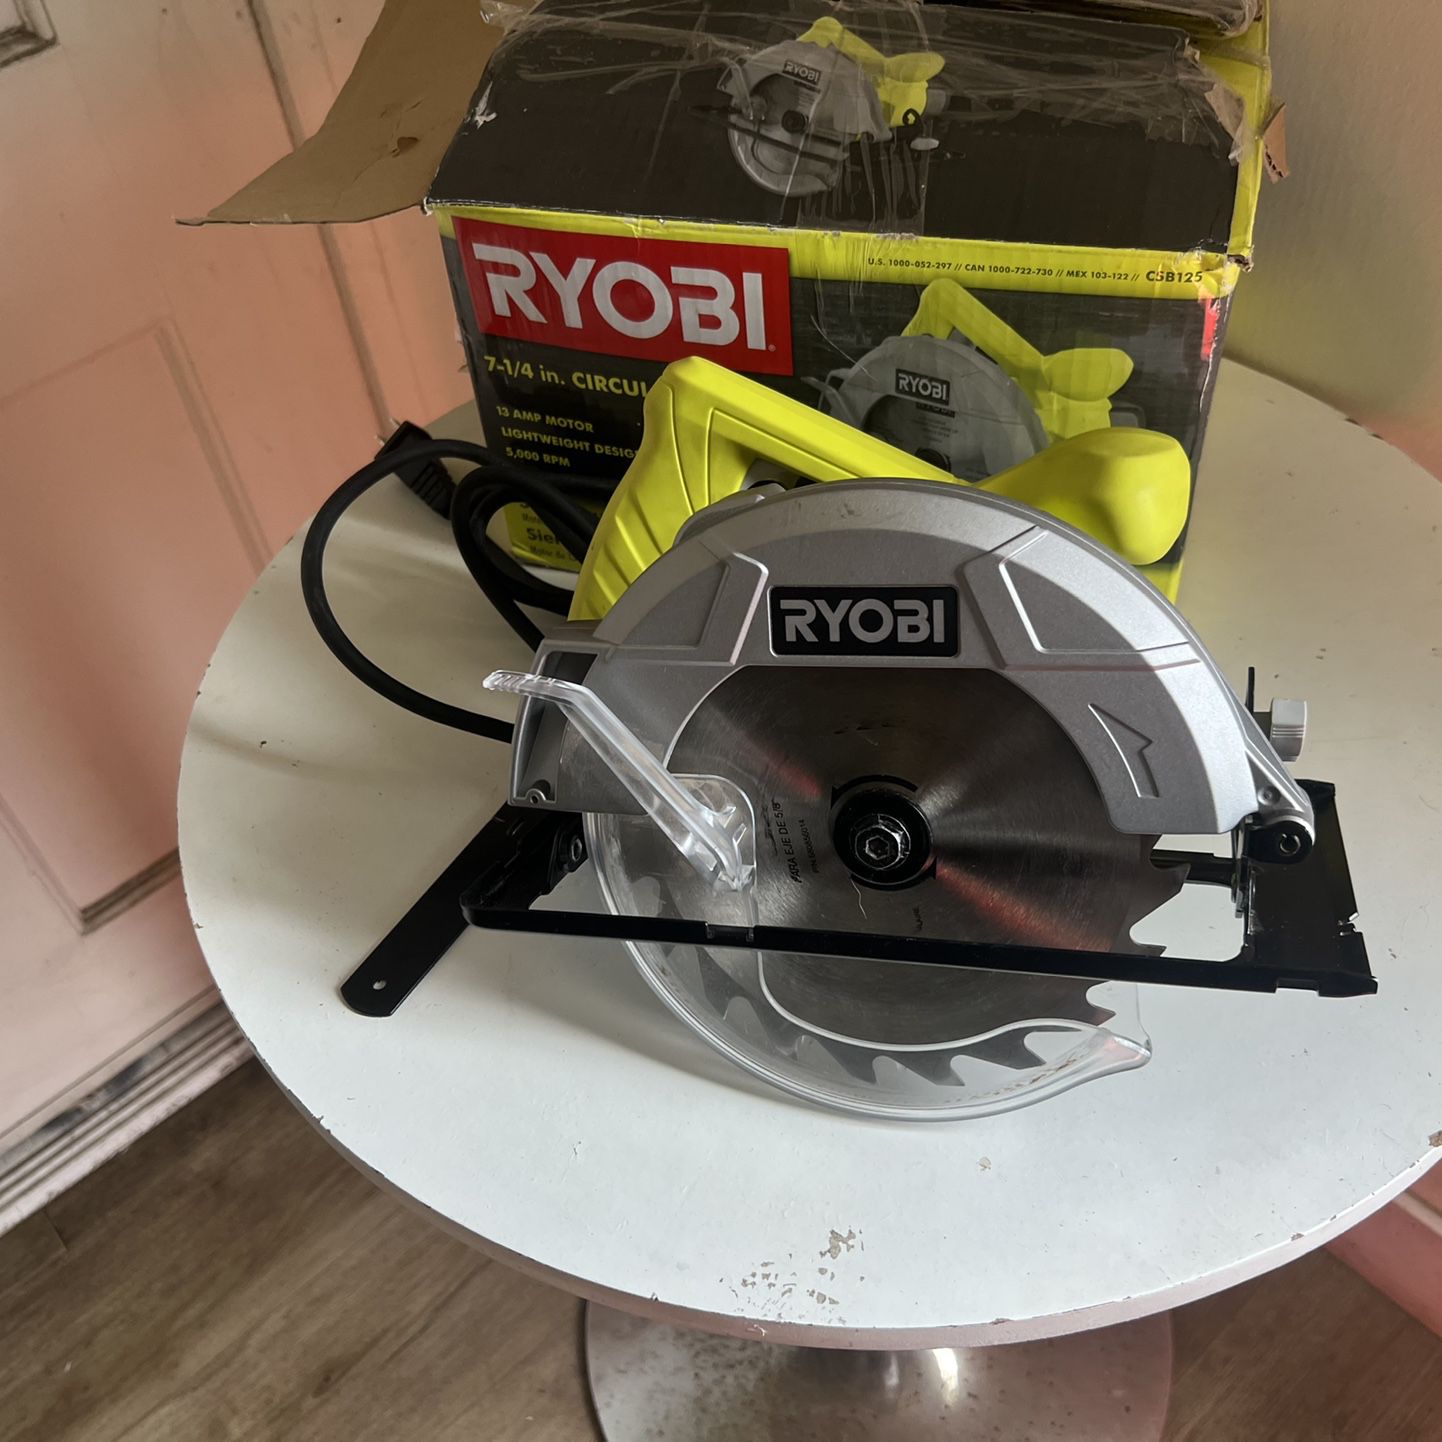 RYOBI 13 Amp Corded 7-1/4 in. Circular Saw for Sale in La Habra Heights, CA  OfferUp